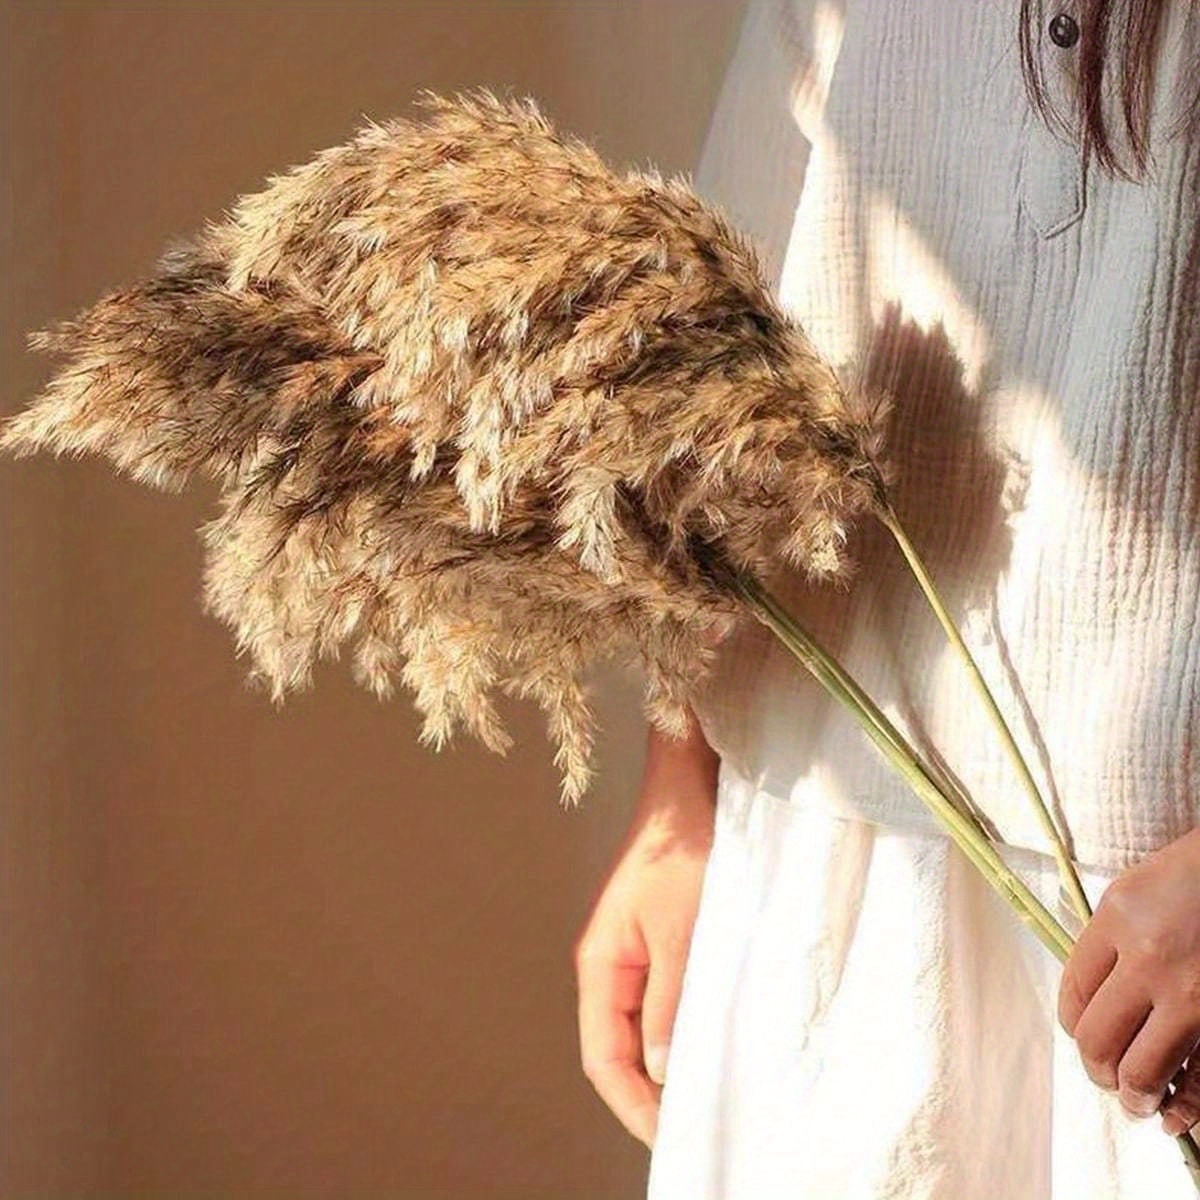 

10pcs 50cm/19.68in Dried Pampas Grass Deco Reed Grass Bouquet For Wedding Boho Flowers Home Table Decor Rustic Farmhouse Party Wedding Decor Gift